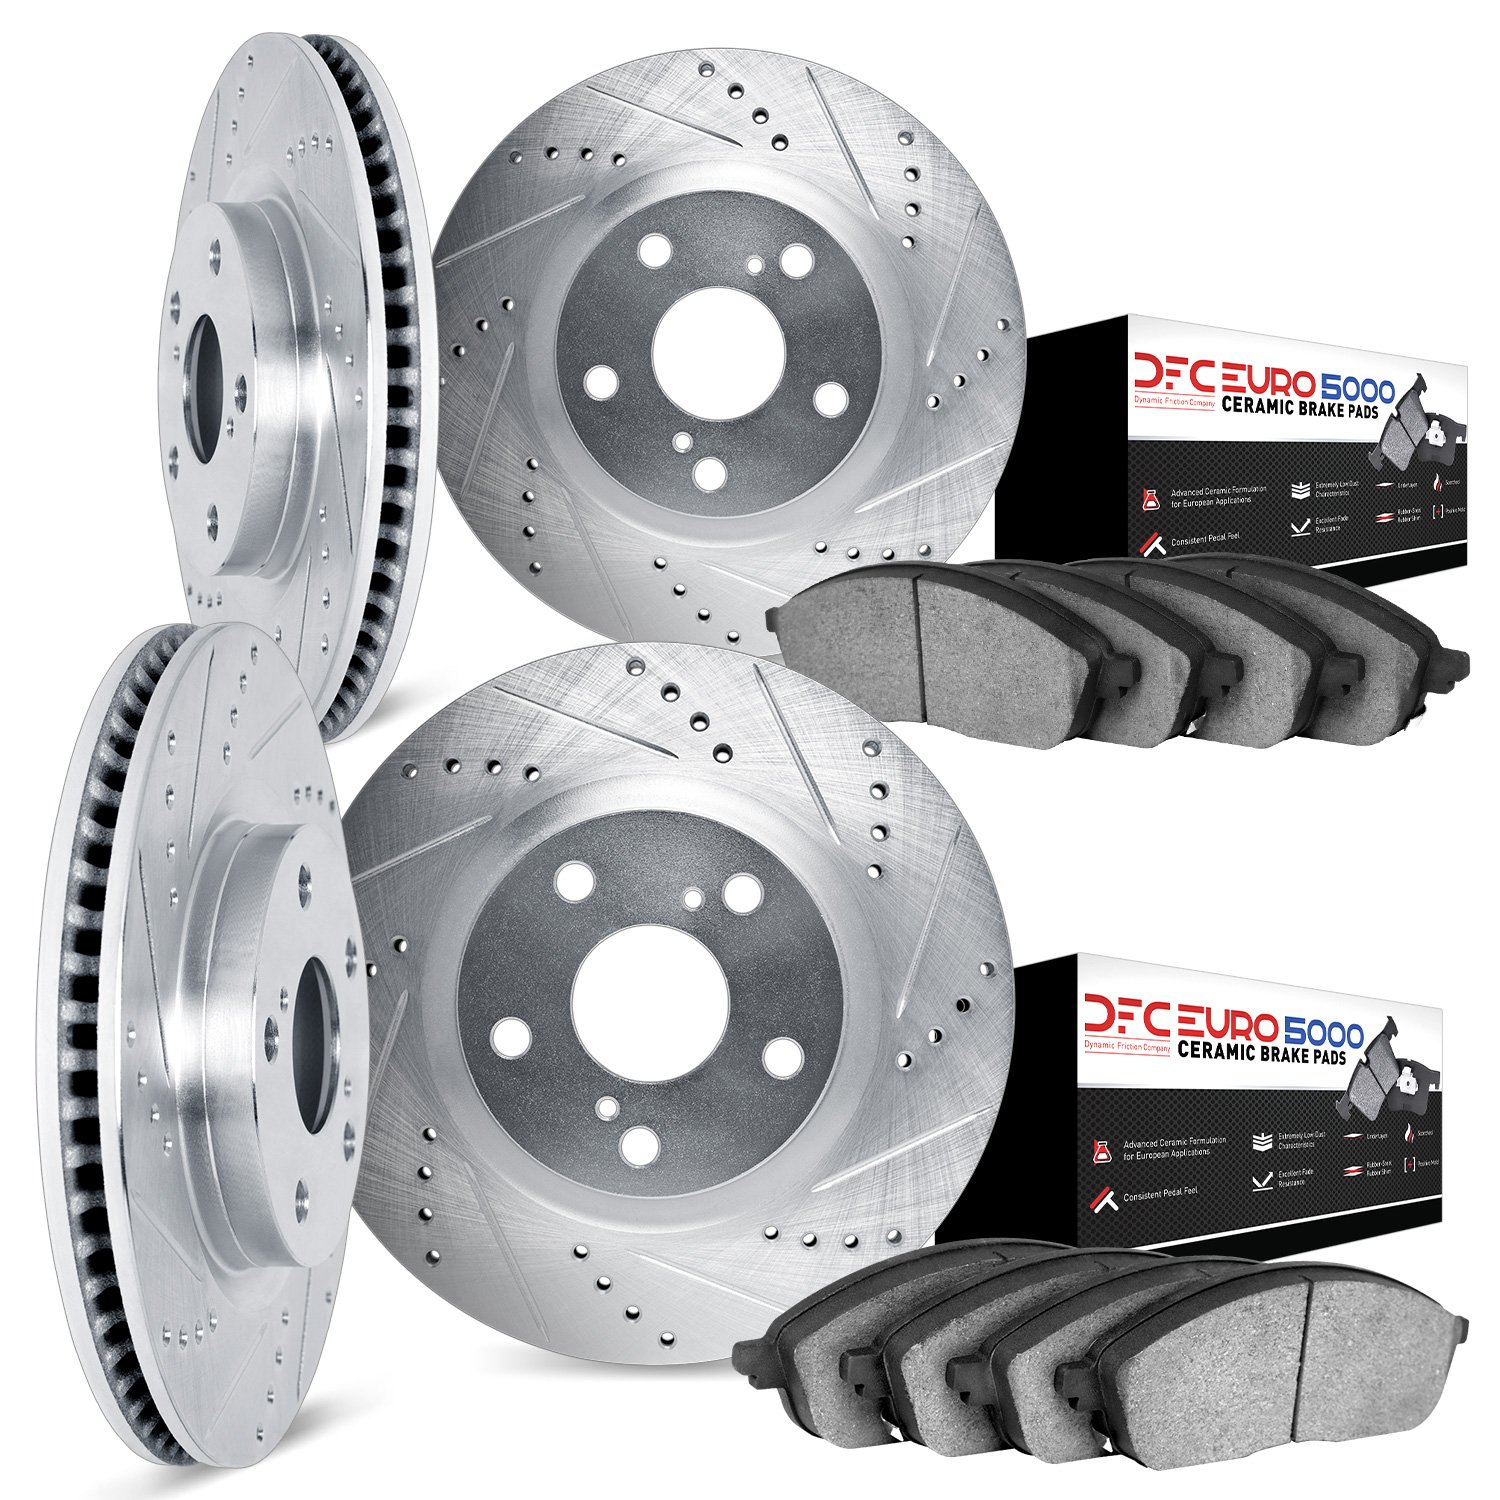 7604-31030 Drilled/Slotted Brake Rotors w/5000 Euro Ceramic Brake Pads Kit [Silver], Fits Select BMW, Position: Front and Rear